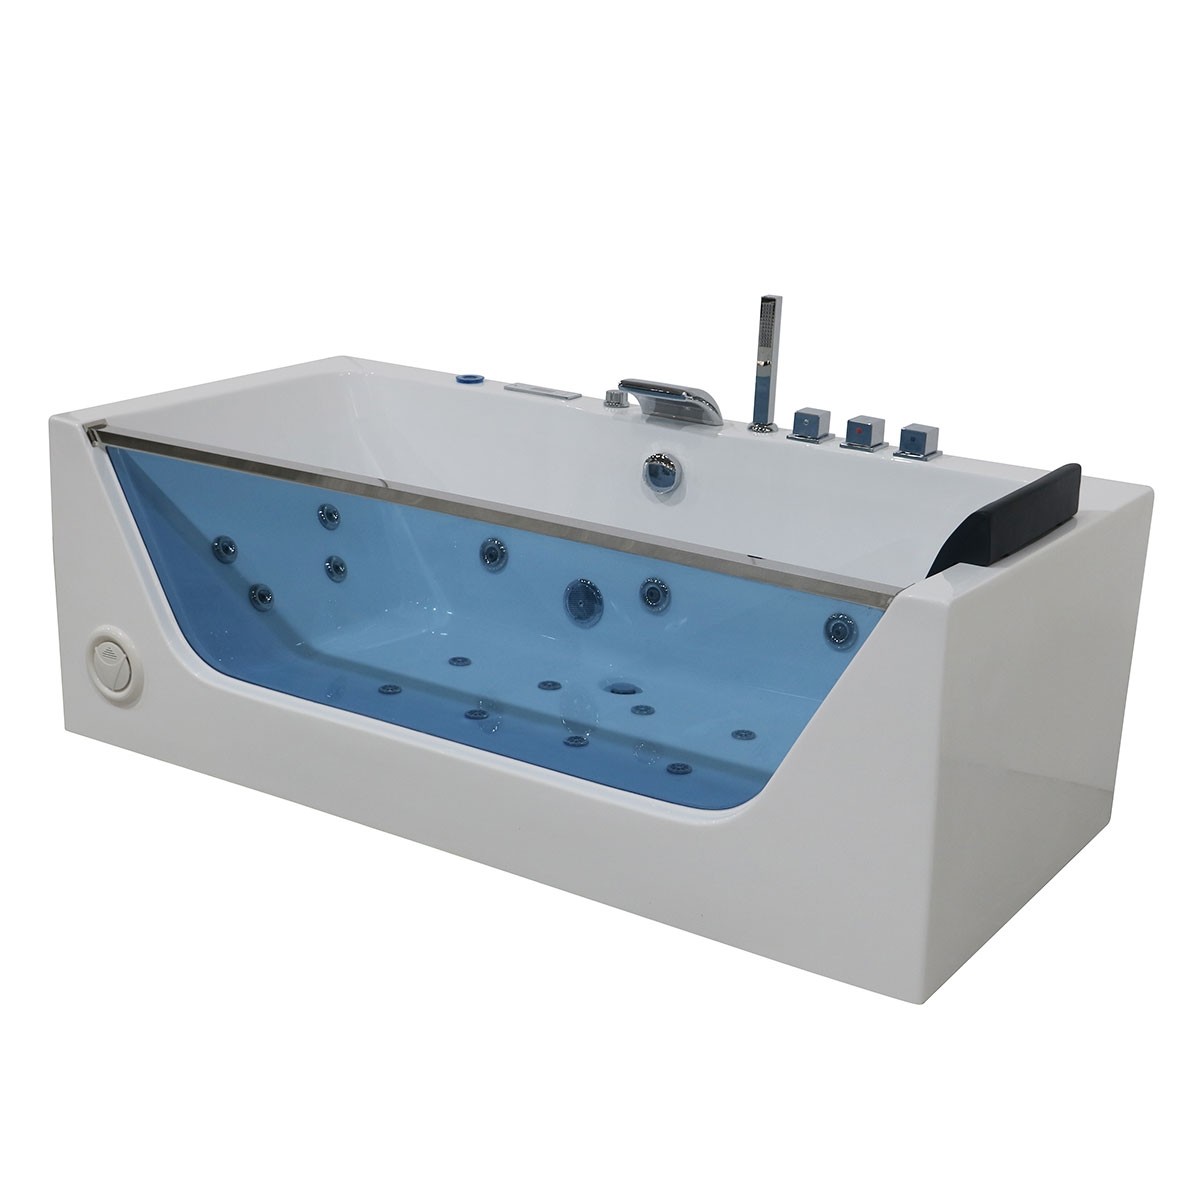 Decoraport 68 In Massage Bathtub with Air Bubble, Computer Panel and Light (DK-Q408)